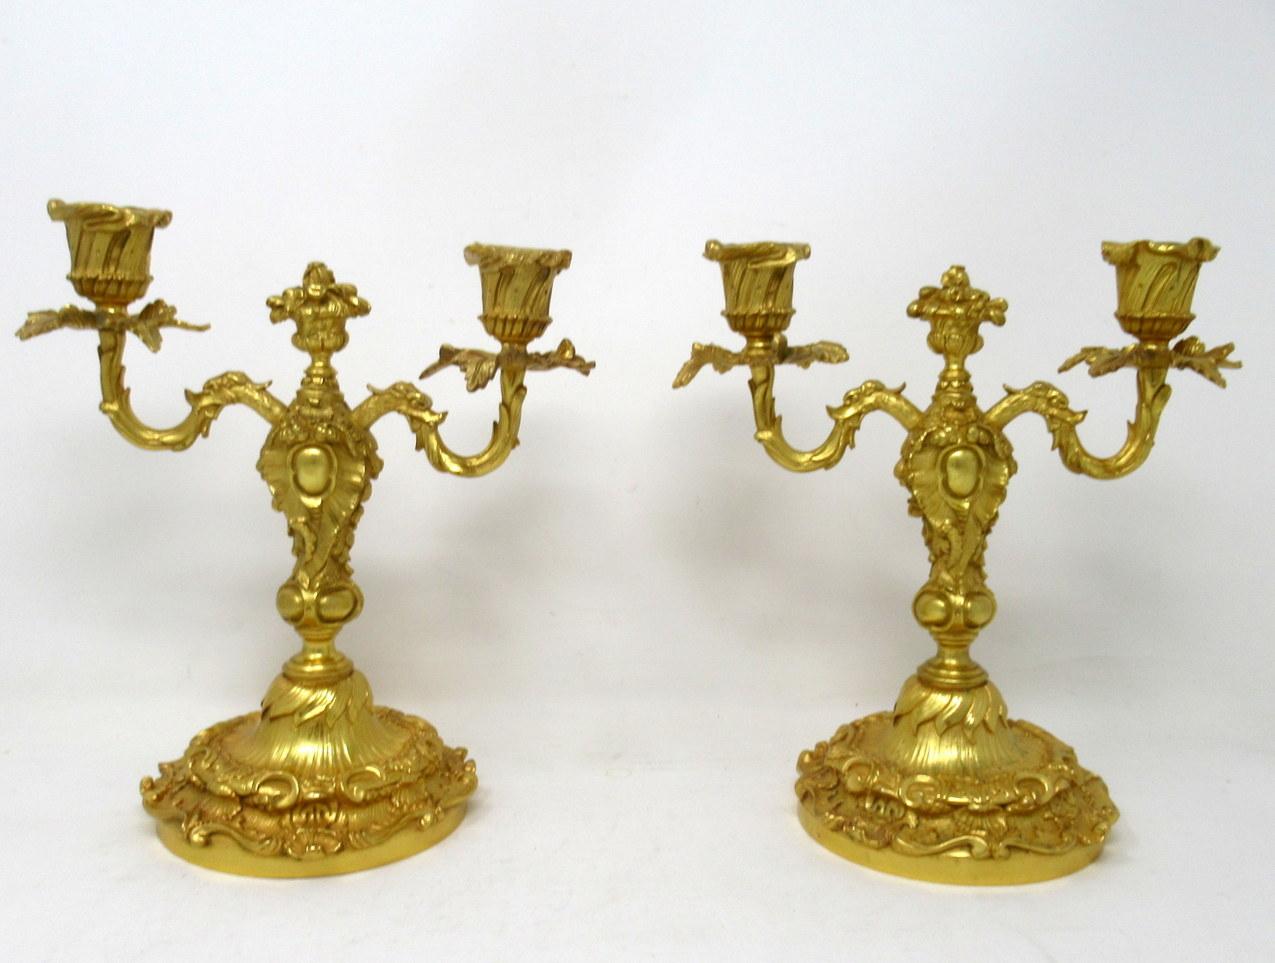 A very stylish pair of twin light chisel cast gilt bronze table or mantel (fireplace) candelabras in George III style, last quarter of the 19th century, of French origin.

Each with central naturalistic finial modelled as an urn filled with fruits